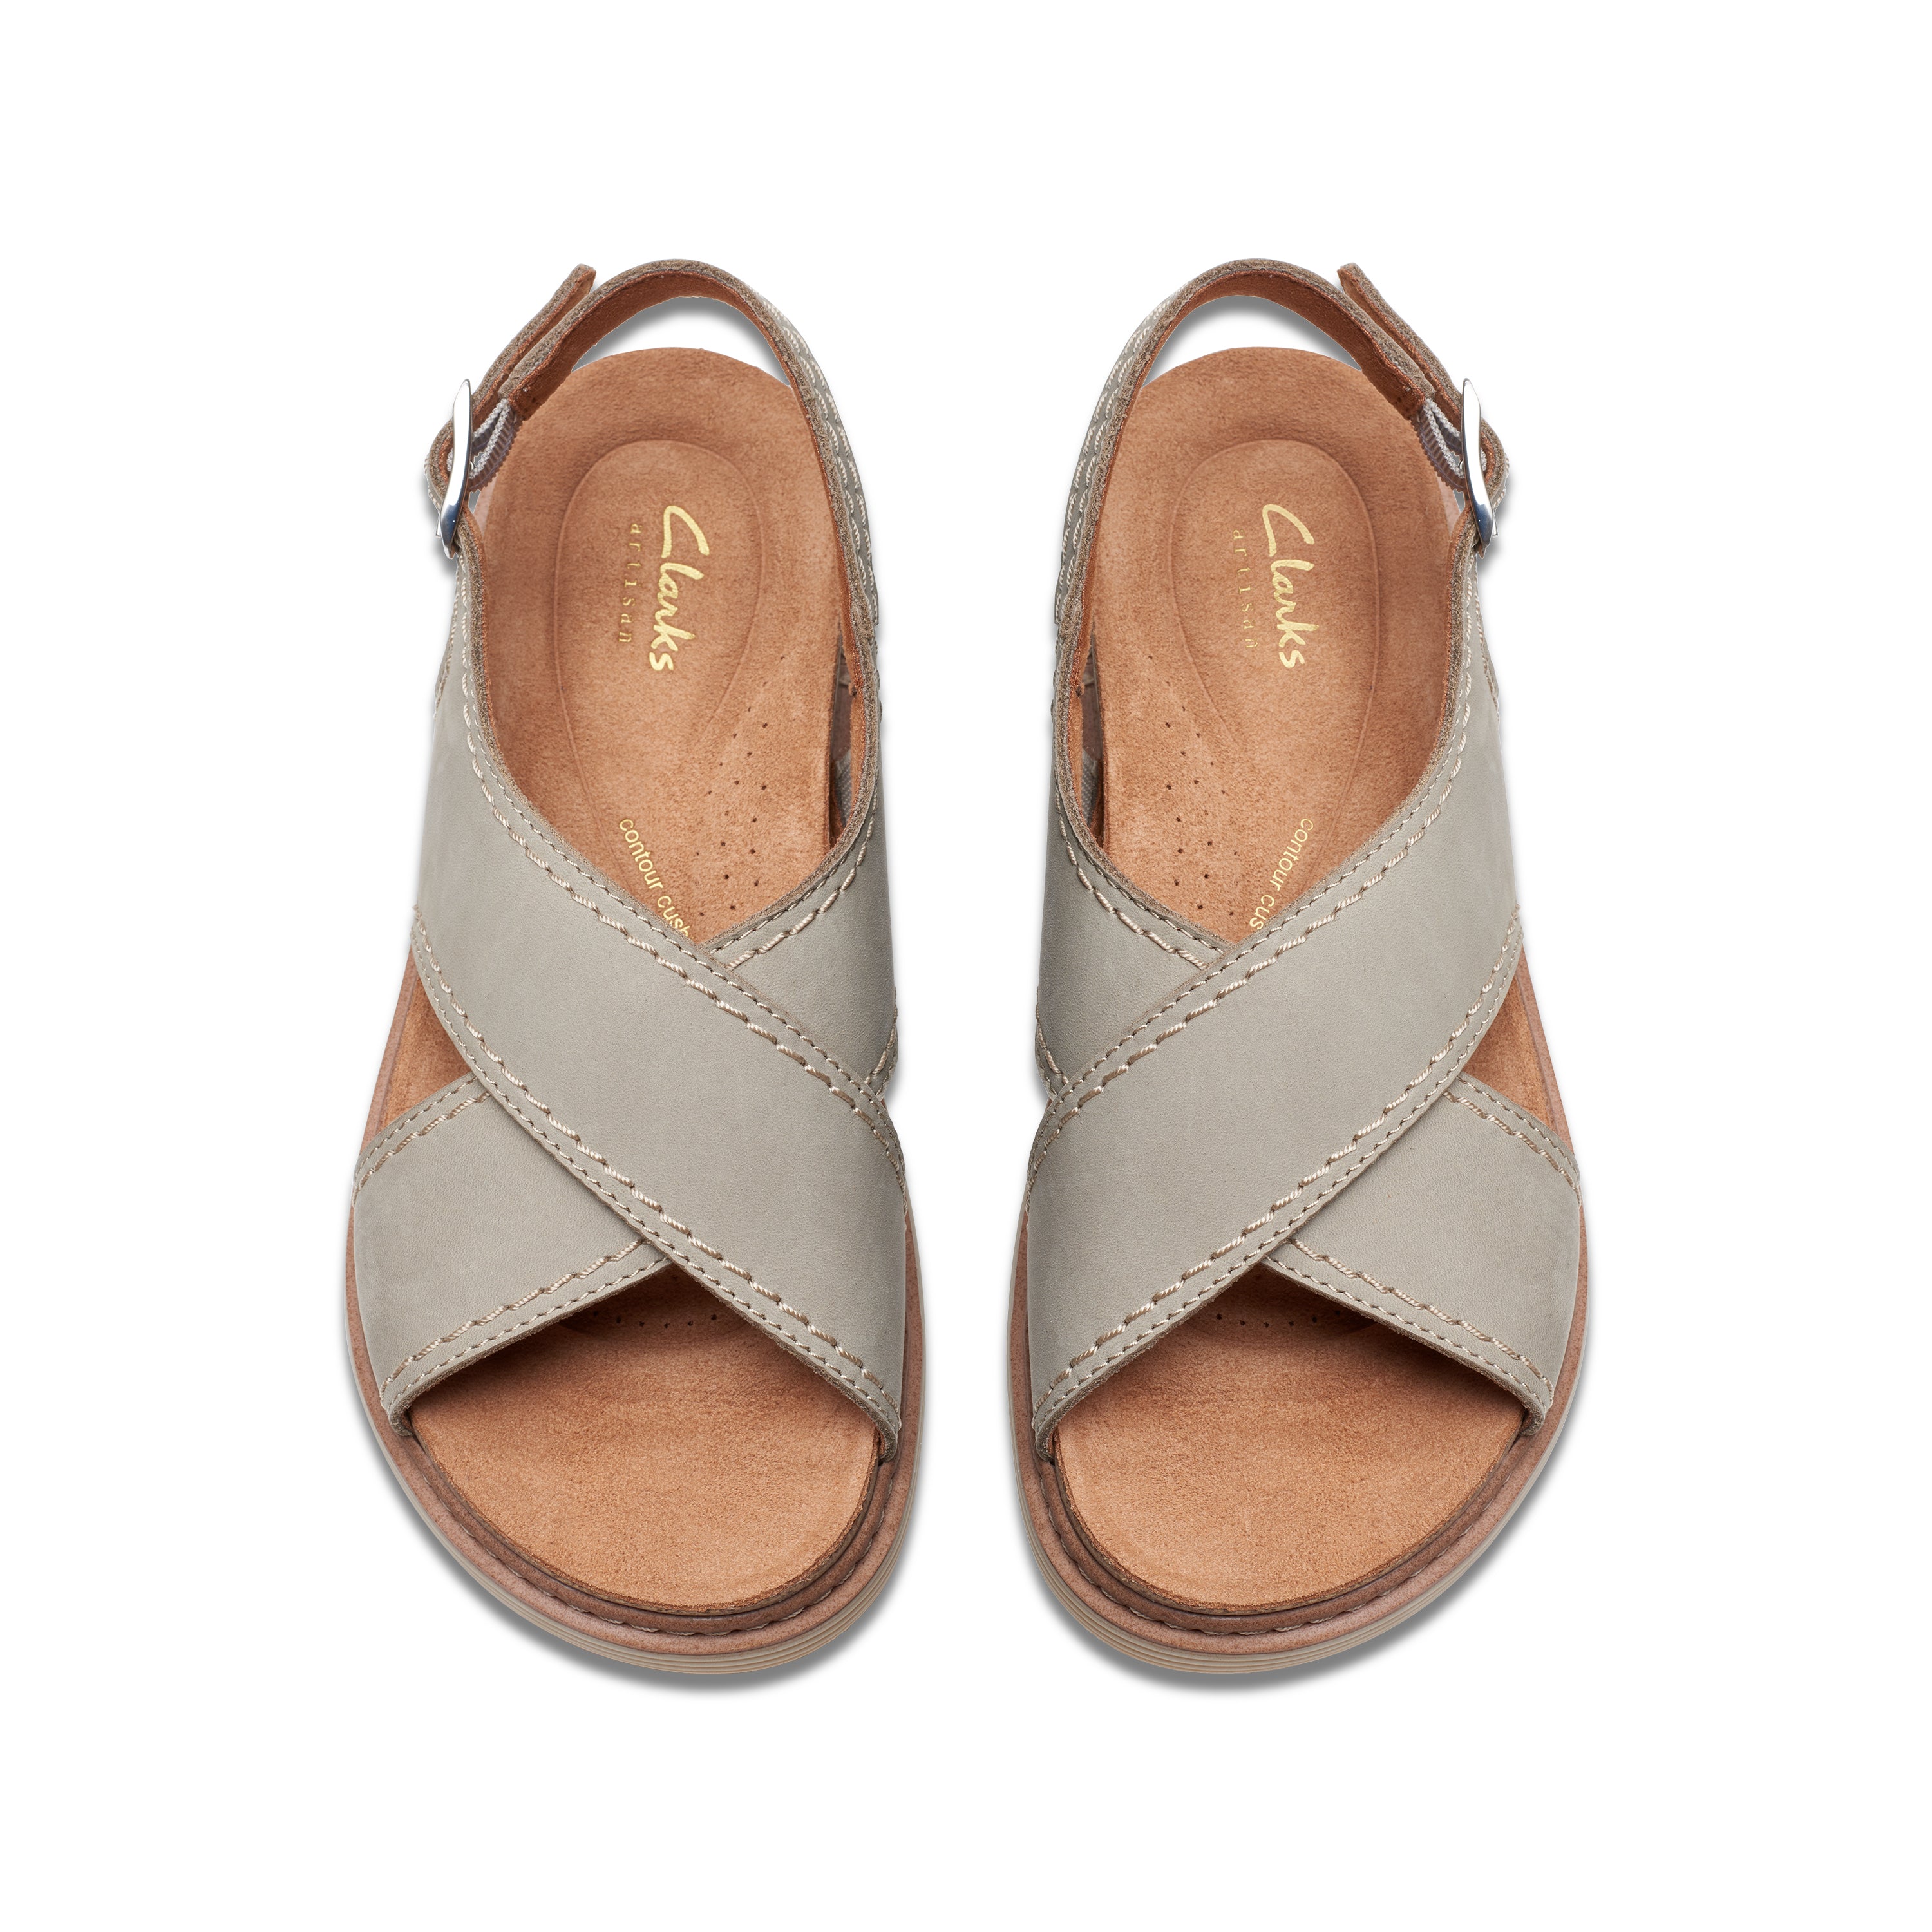 Clarks Daily wear and Casual Wave Bright Sandal at best price in Kolkata |  ID: 16338214212